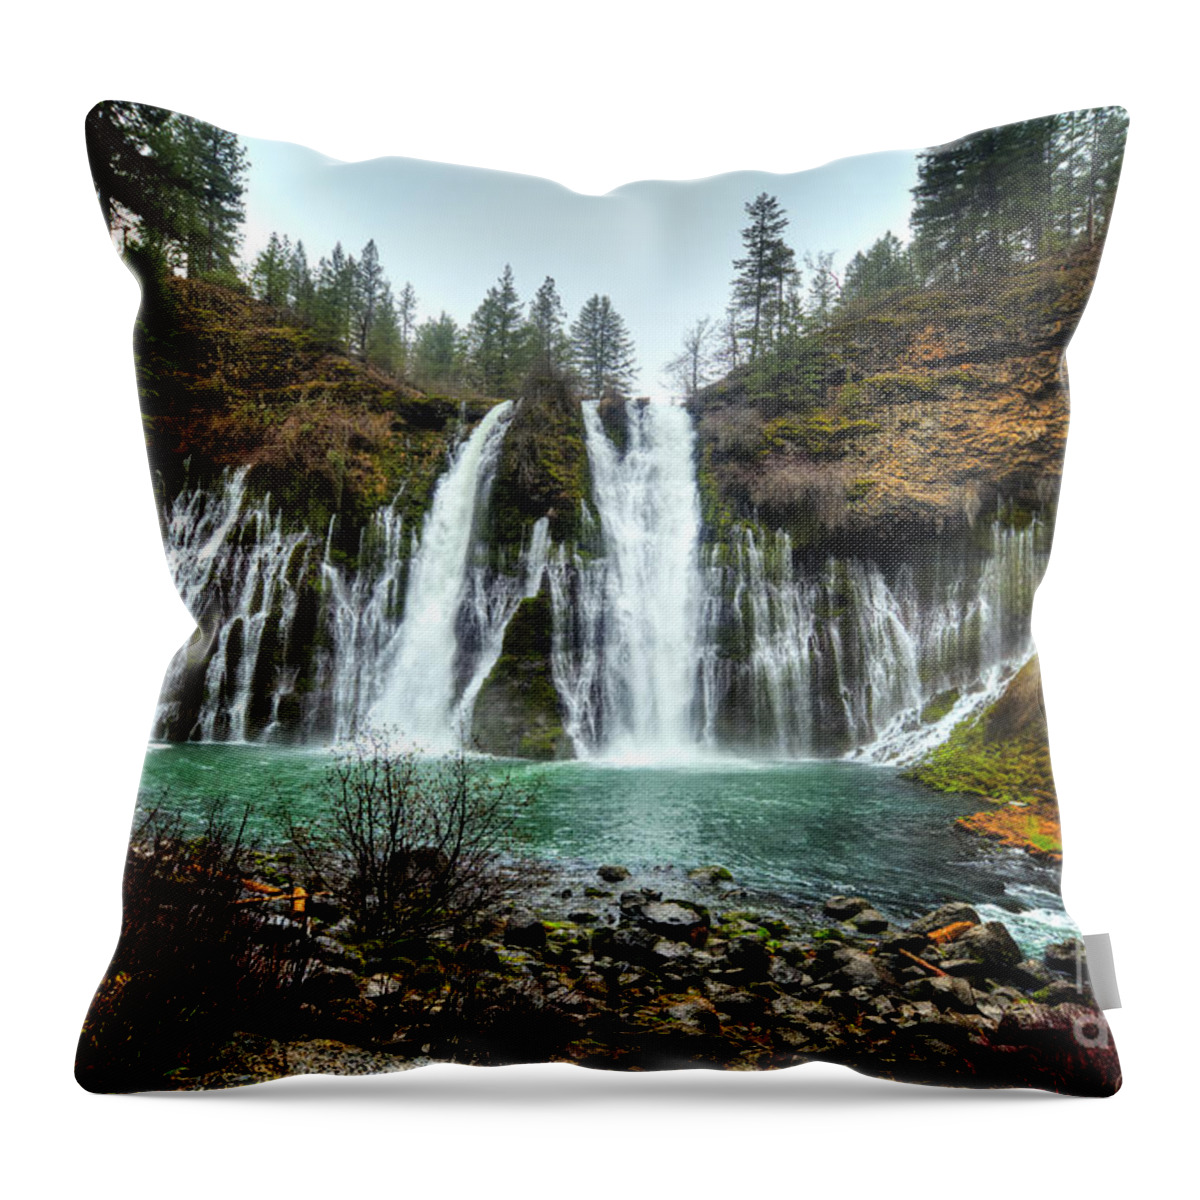 Water Throw Pillow featuring the photograph Burney Falls by Paul Gillham